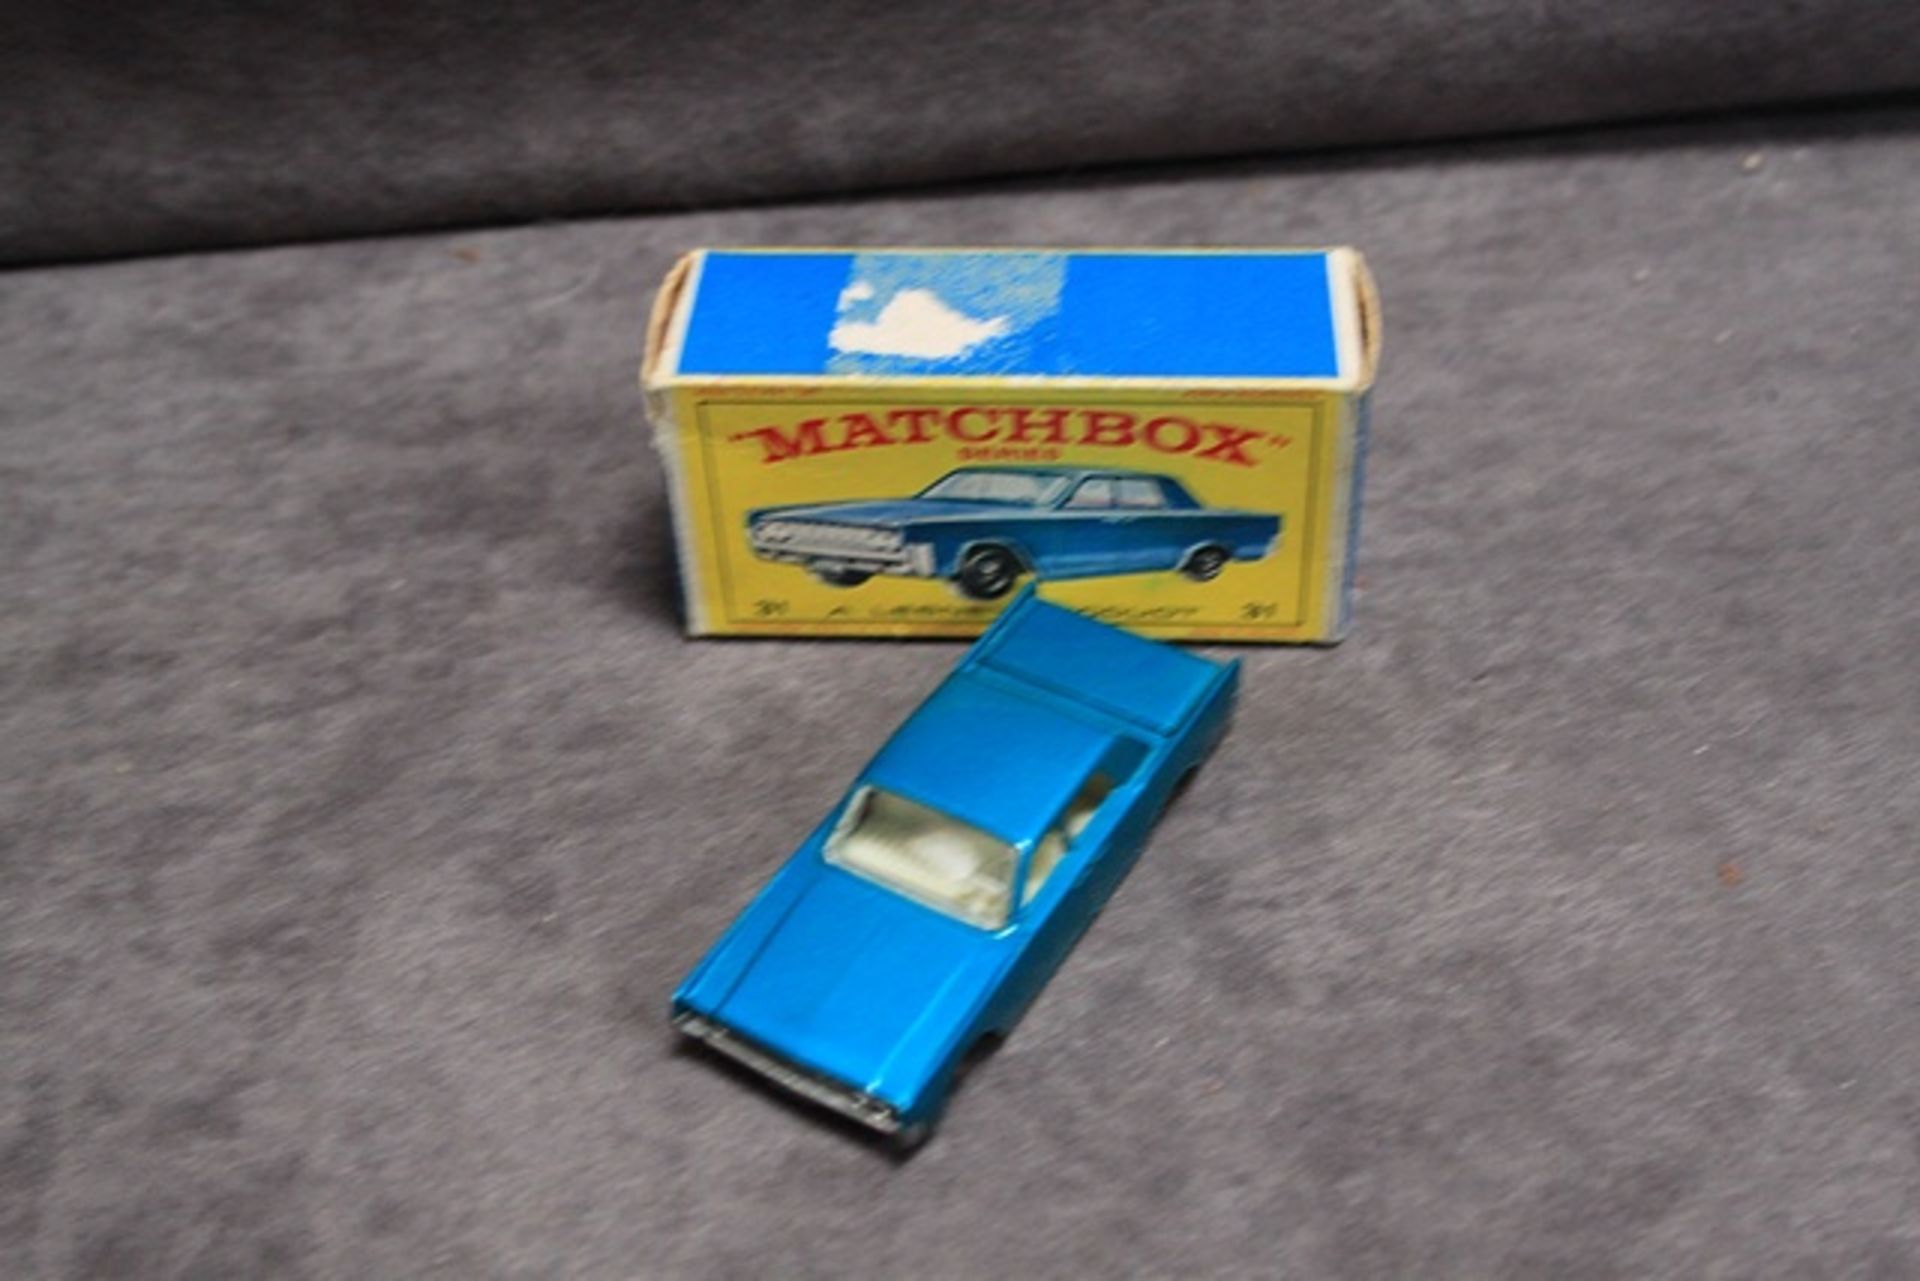 Mint Matchbox Series diecast #31 Lincoln Continenetal in metallic Blue in ecellent firm box - Image 3 of 3